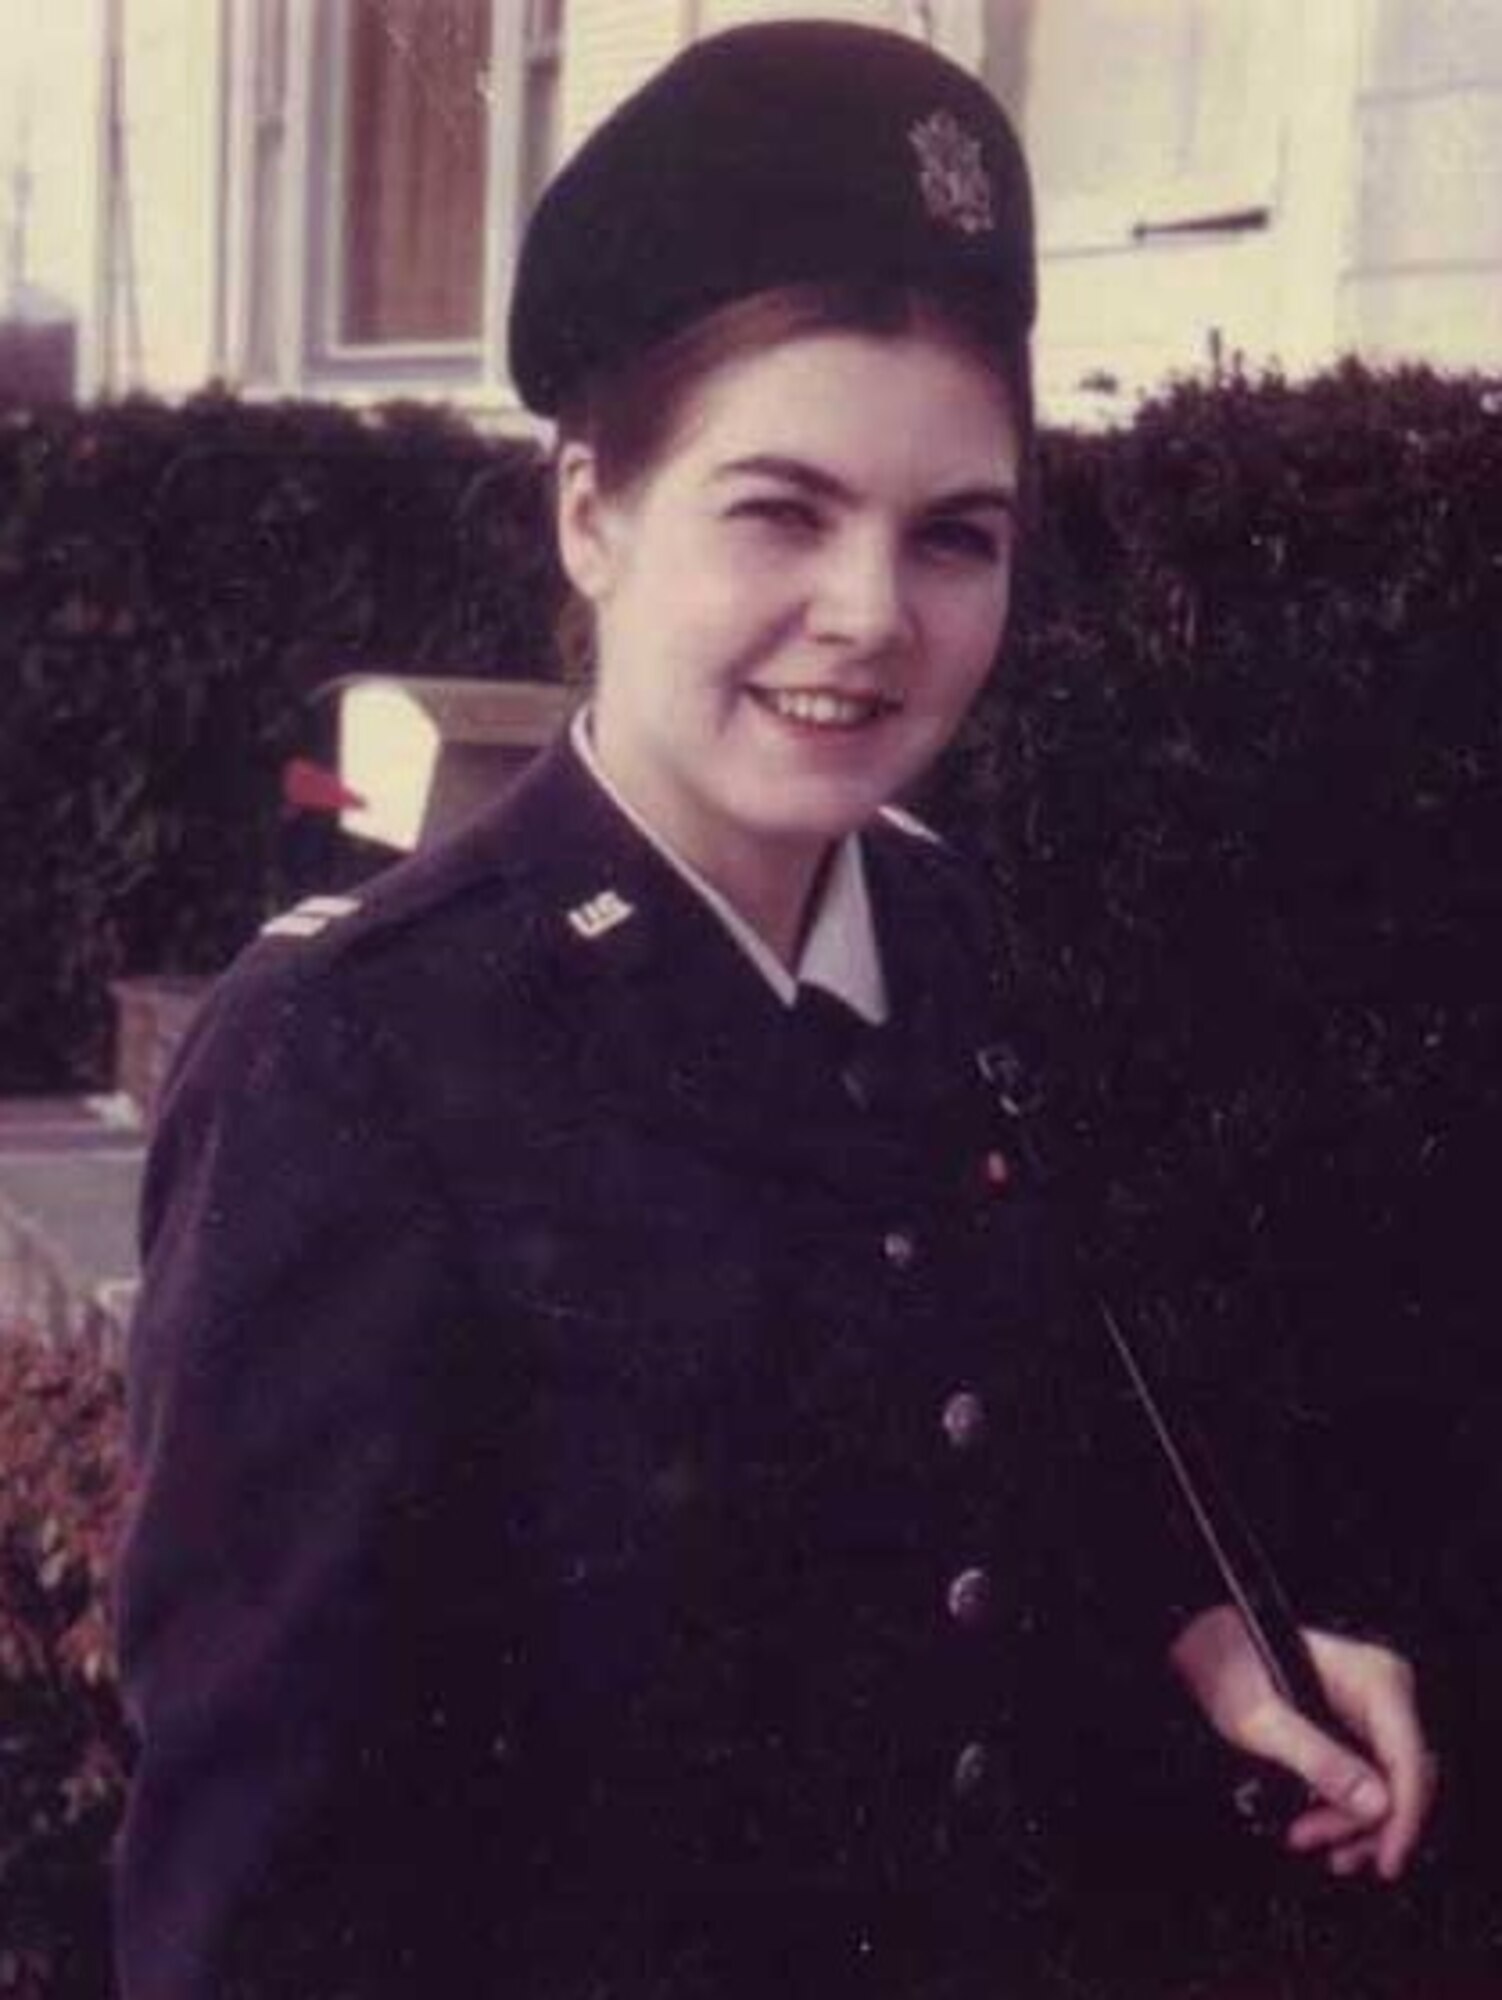 Former Air Force Lieutenant Sharron Frontiero served at Maxwell Air Force Base, Alabama, in the 1970s. (Courtesy Photo)